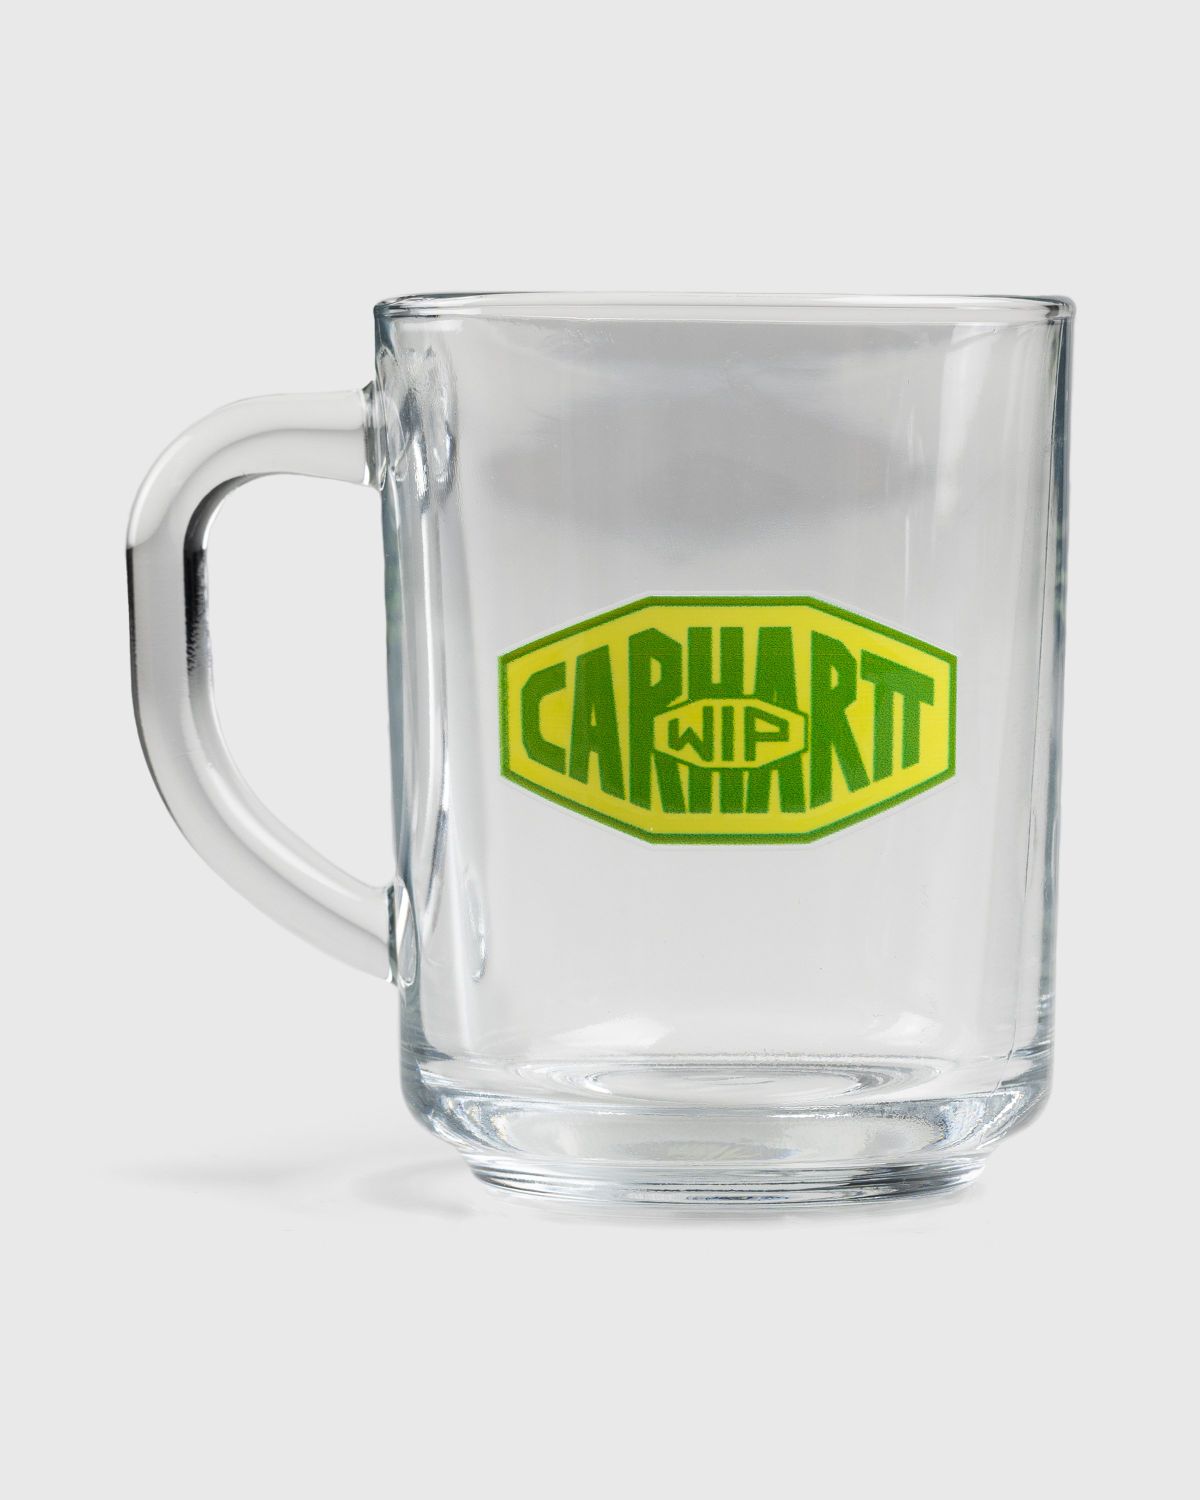 Carhartt – New Tools Glass Mug Clear - Lifestyle - Clear - Image 1